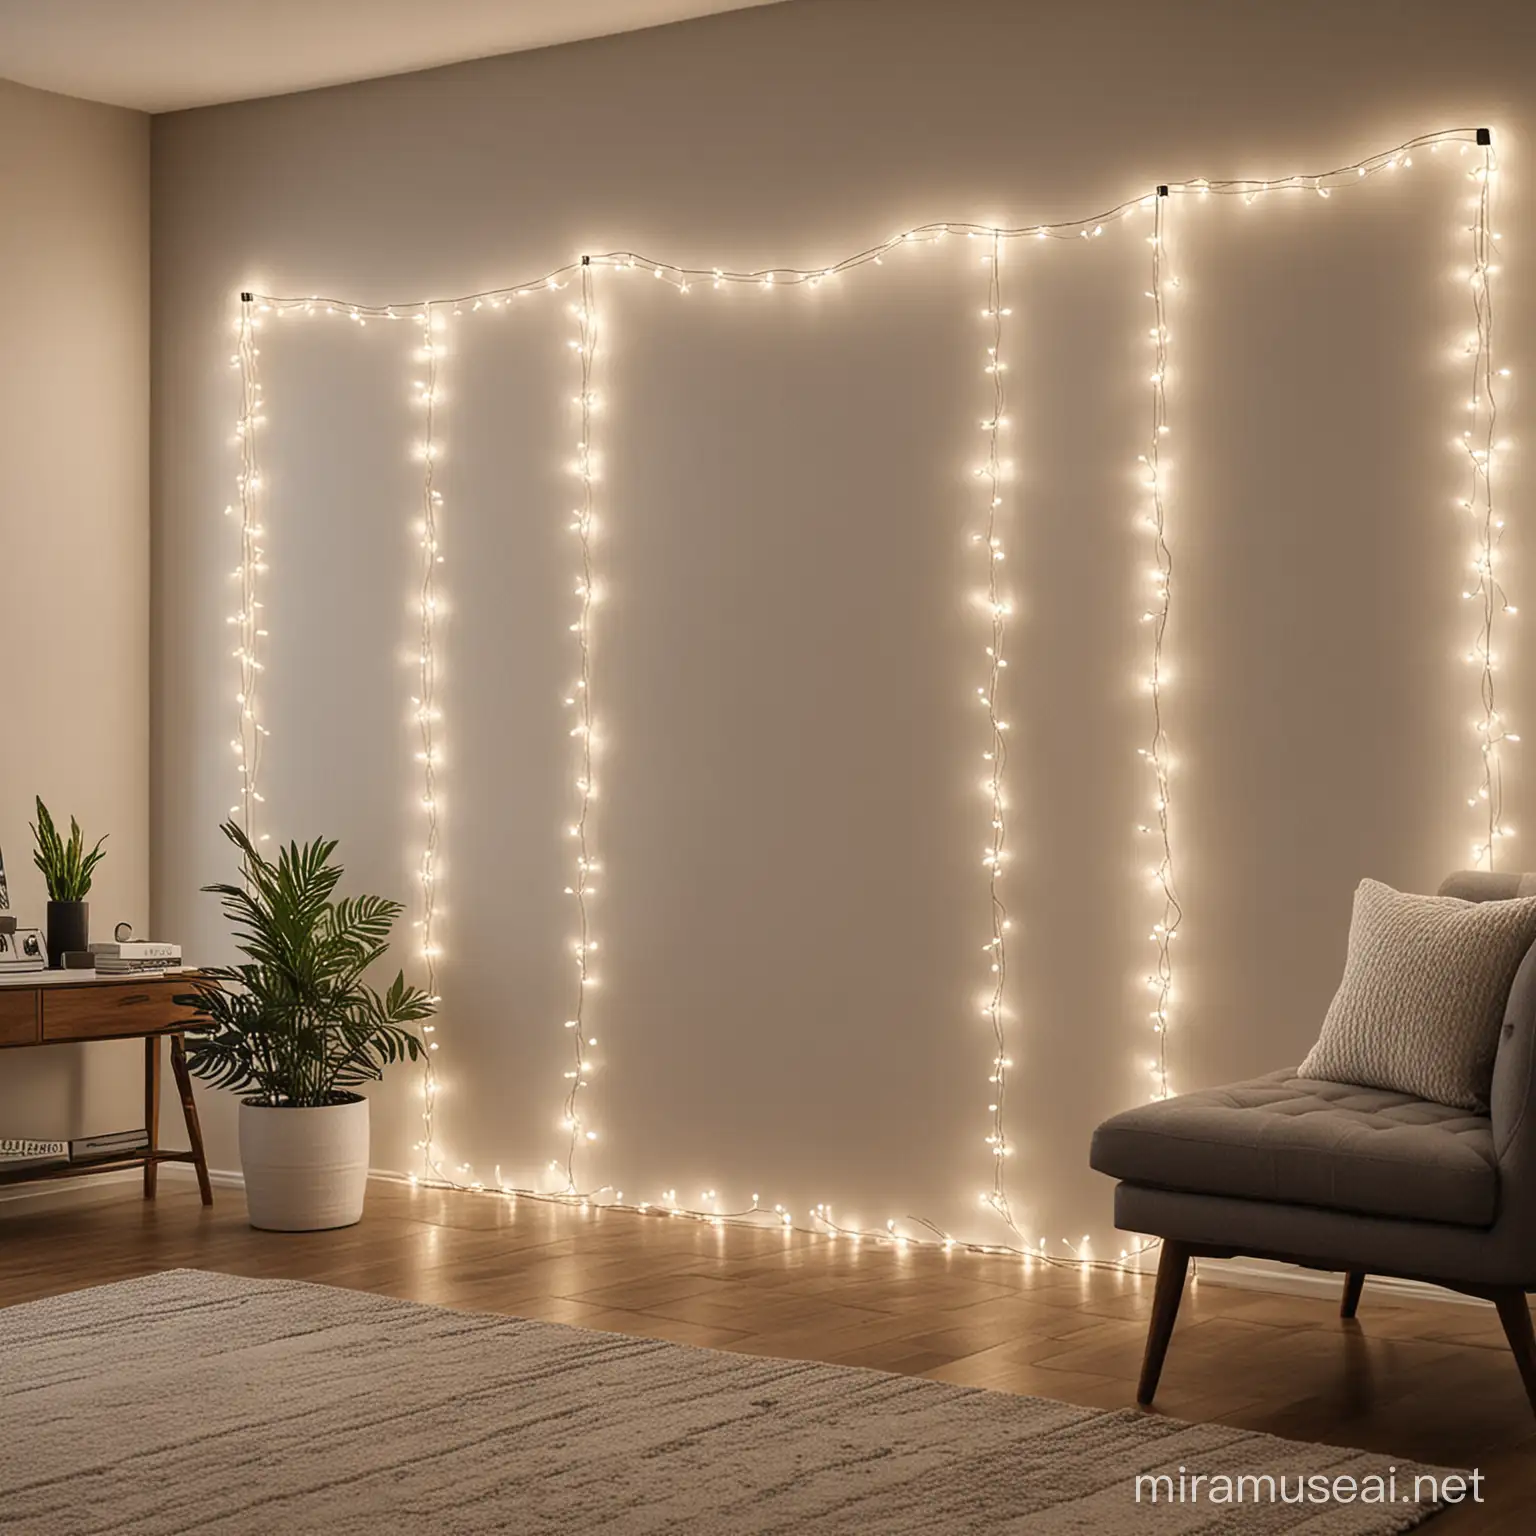 A modern decor with LED String Lights